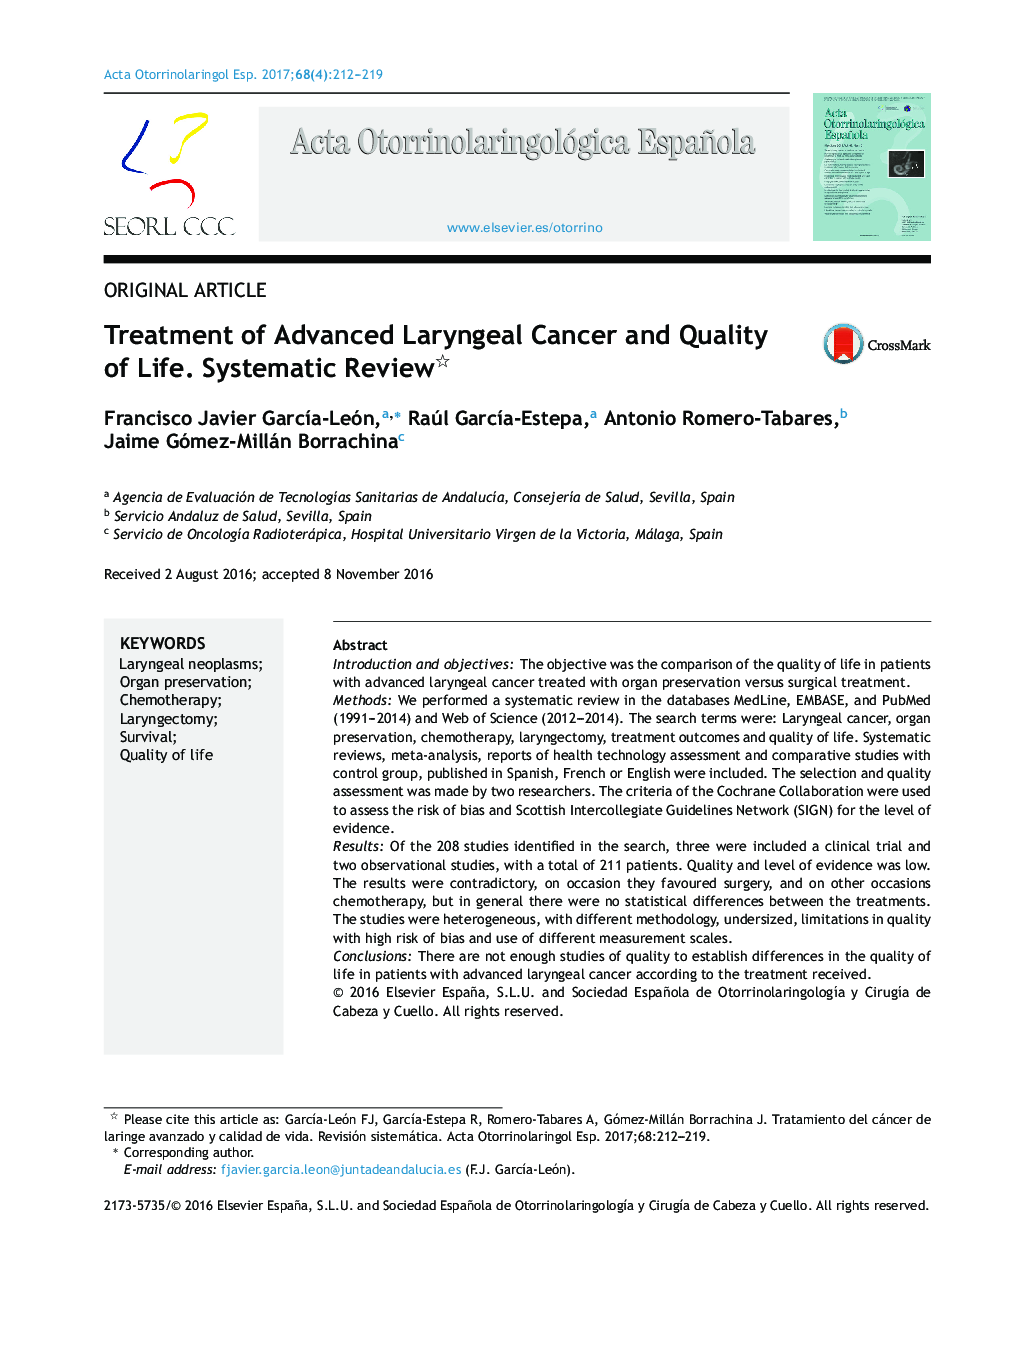 Treatment of Advanced Laryngeal Cancer and Quality of Life. Systematic Review